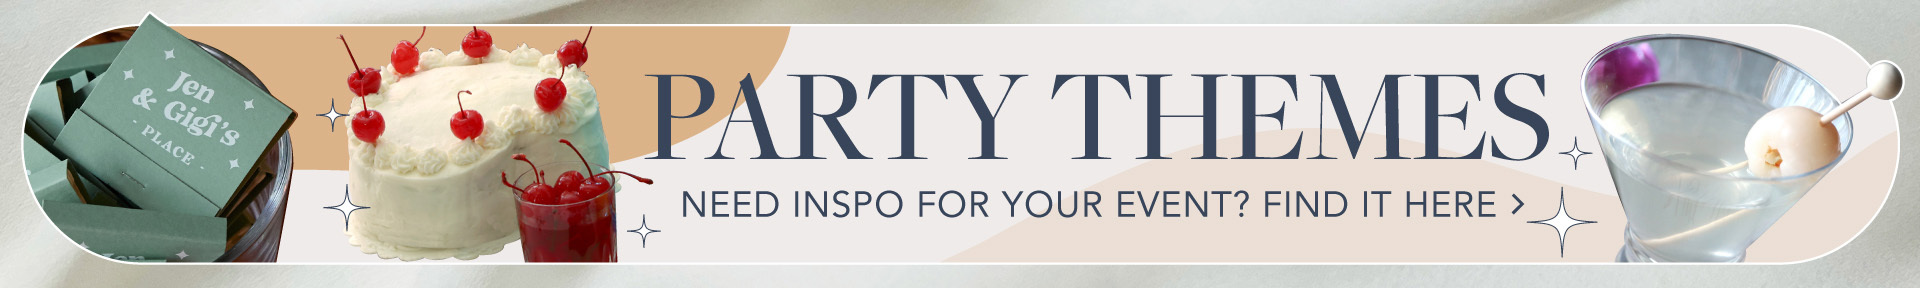 Party Themes. Need inspo for your event? Find it here.